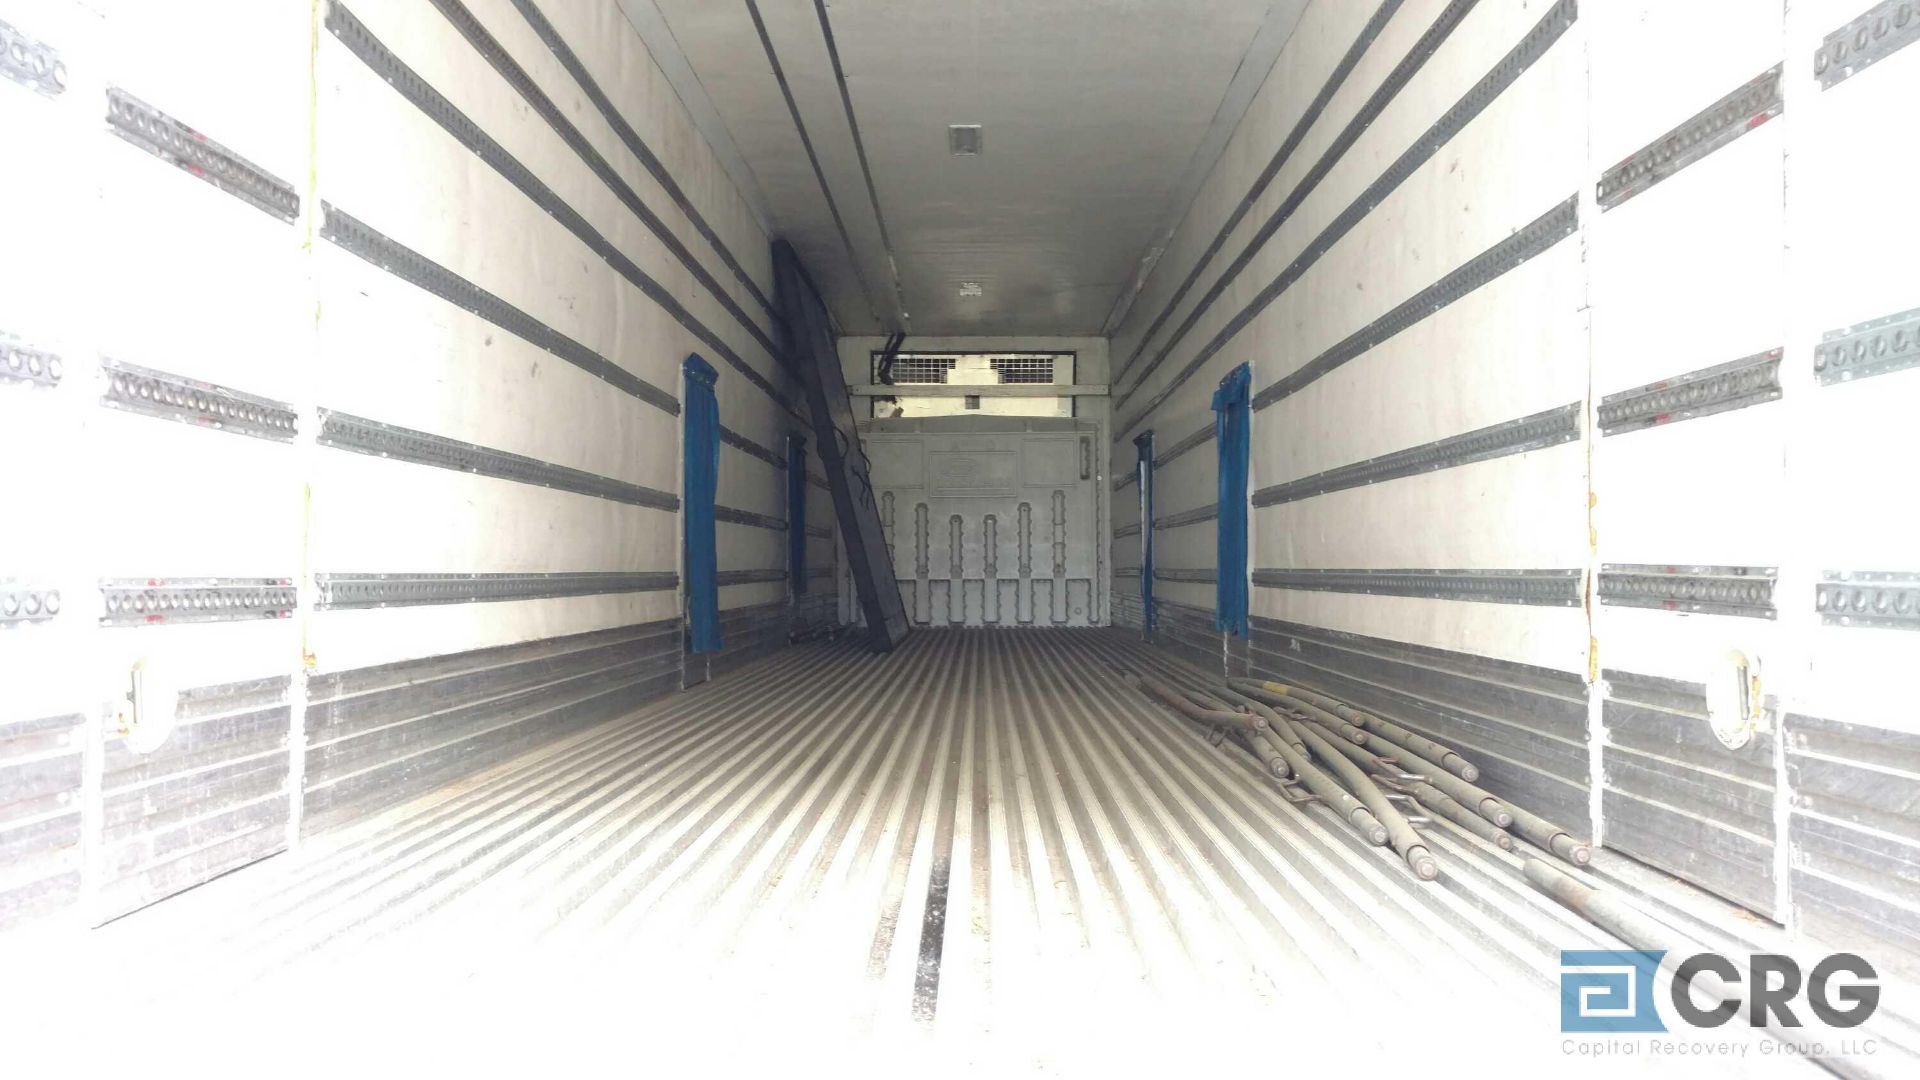 2005 Great Dane Multi Temp Refrigerated Semi Trailer - 43 Long, 96" wide, Carrier Stealth, hours, 6 - Image 6 of 6